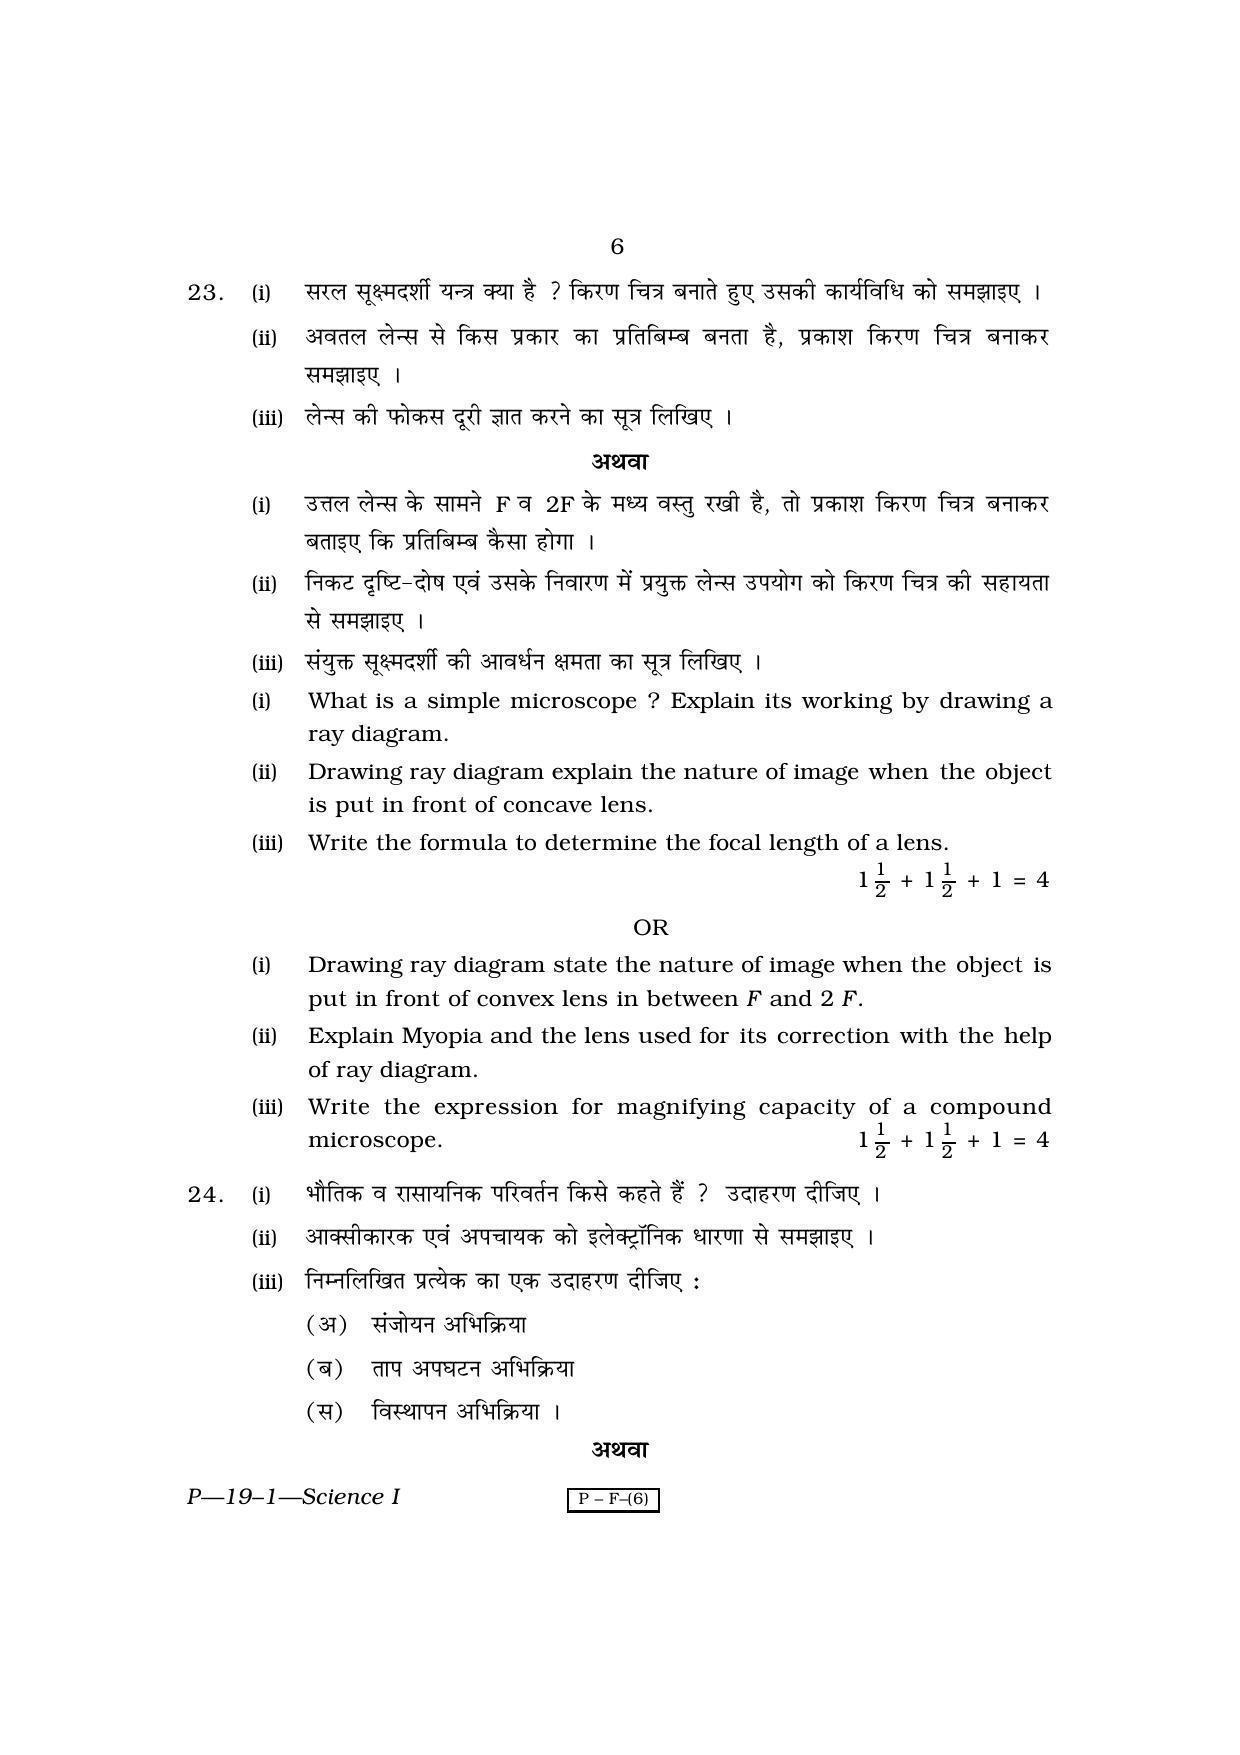 RBSE 2010 Science - I Praveshika Question Paper - Page 6